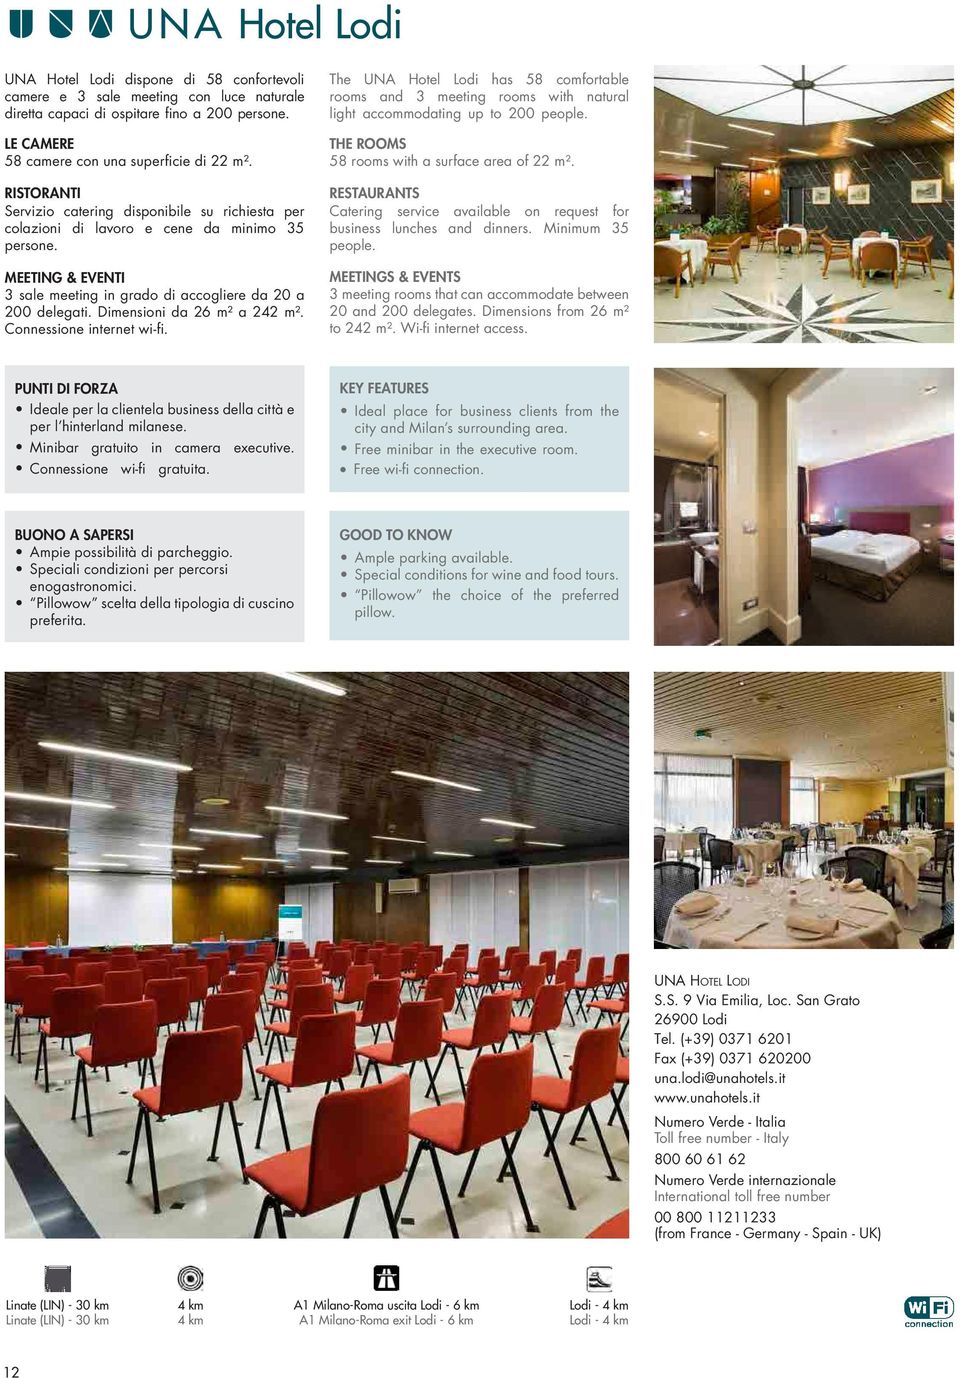 Dimensioni da 26 m² a 242 m². Connessione internet wifi. The UNA Hotel Lodi has 58 comfortable rooms and 3 meeting rooms with natural light accommodating up to 200 people.